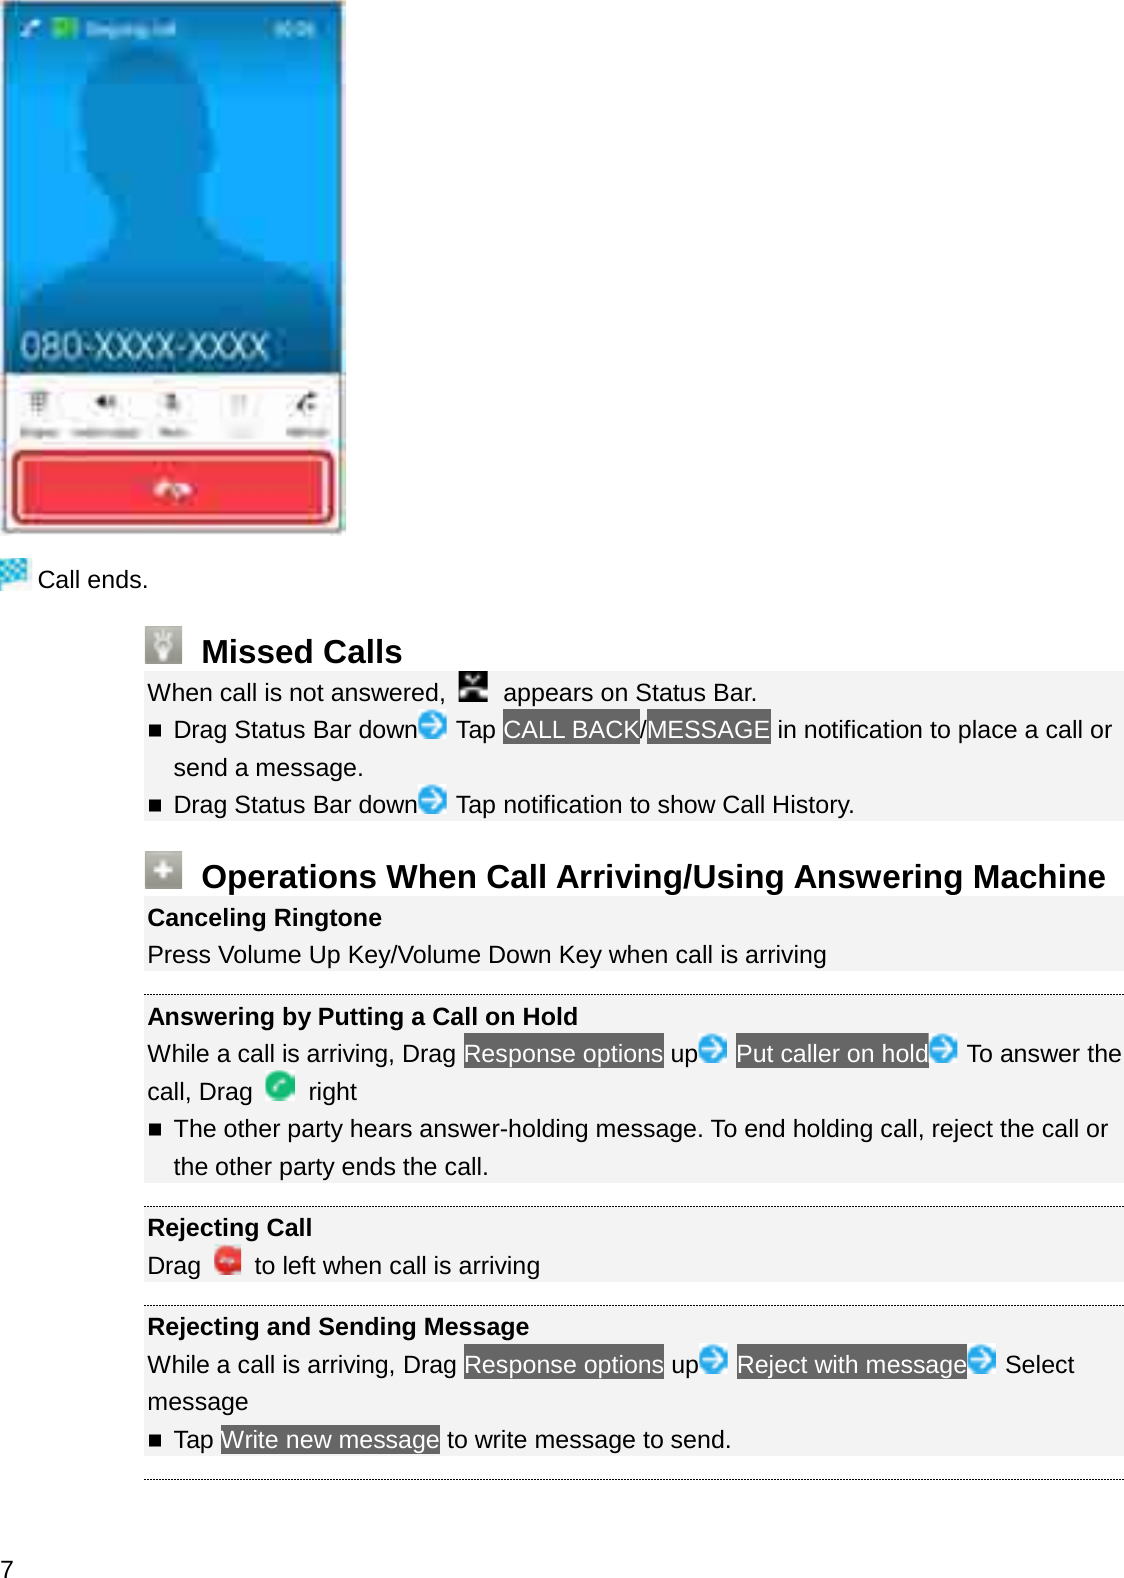 Call ends.Missed CallsWhen call is not answered,  appears on Status Bar.Drag Status Bar down Tap CALL BACK/MESSAGE in notification to place a call or send a message.Drag Status Bar down Tap notification to show Call History.Operations When Call Arriving/Using Answering MachineCanceling RingtonePress Volume Up Key/Volume Down Key when call is arrivingAnswering by Putting a Call on HoldWhile a call is arriving, Drag Response options up Put caller on hold To answer the call, Drag  rightThe other party hears answer-holding message. To end holding call, reject the call or the other party ends the call.Rejecting CallDrag  to left when call is arrivingRejecting and Sending MessageWhile a call is arriving, Drag Response options up Reject with message SelectmessageTap Write new message to write message to send.7